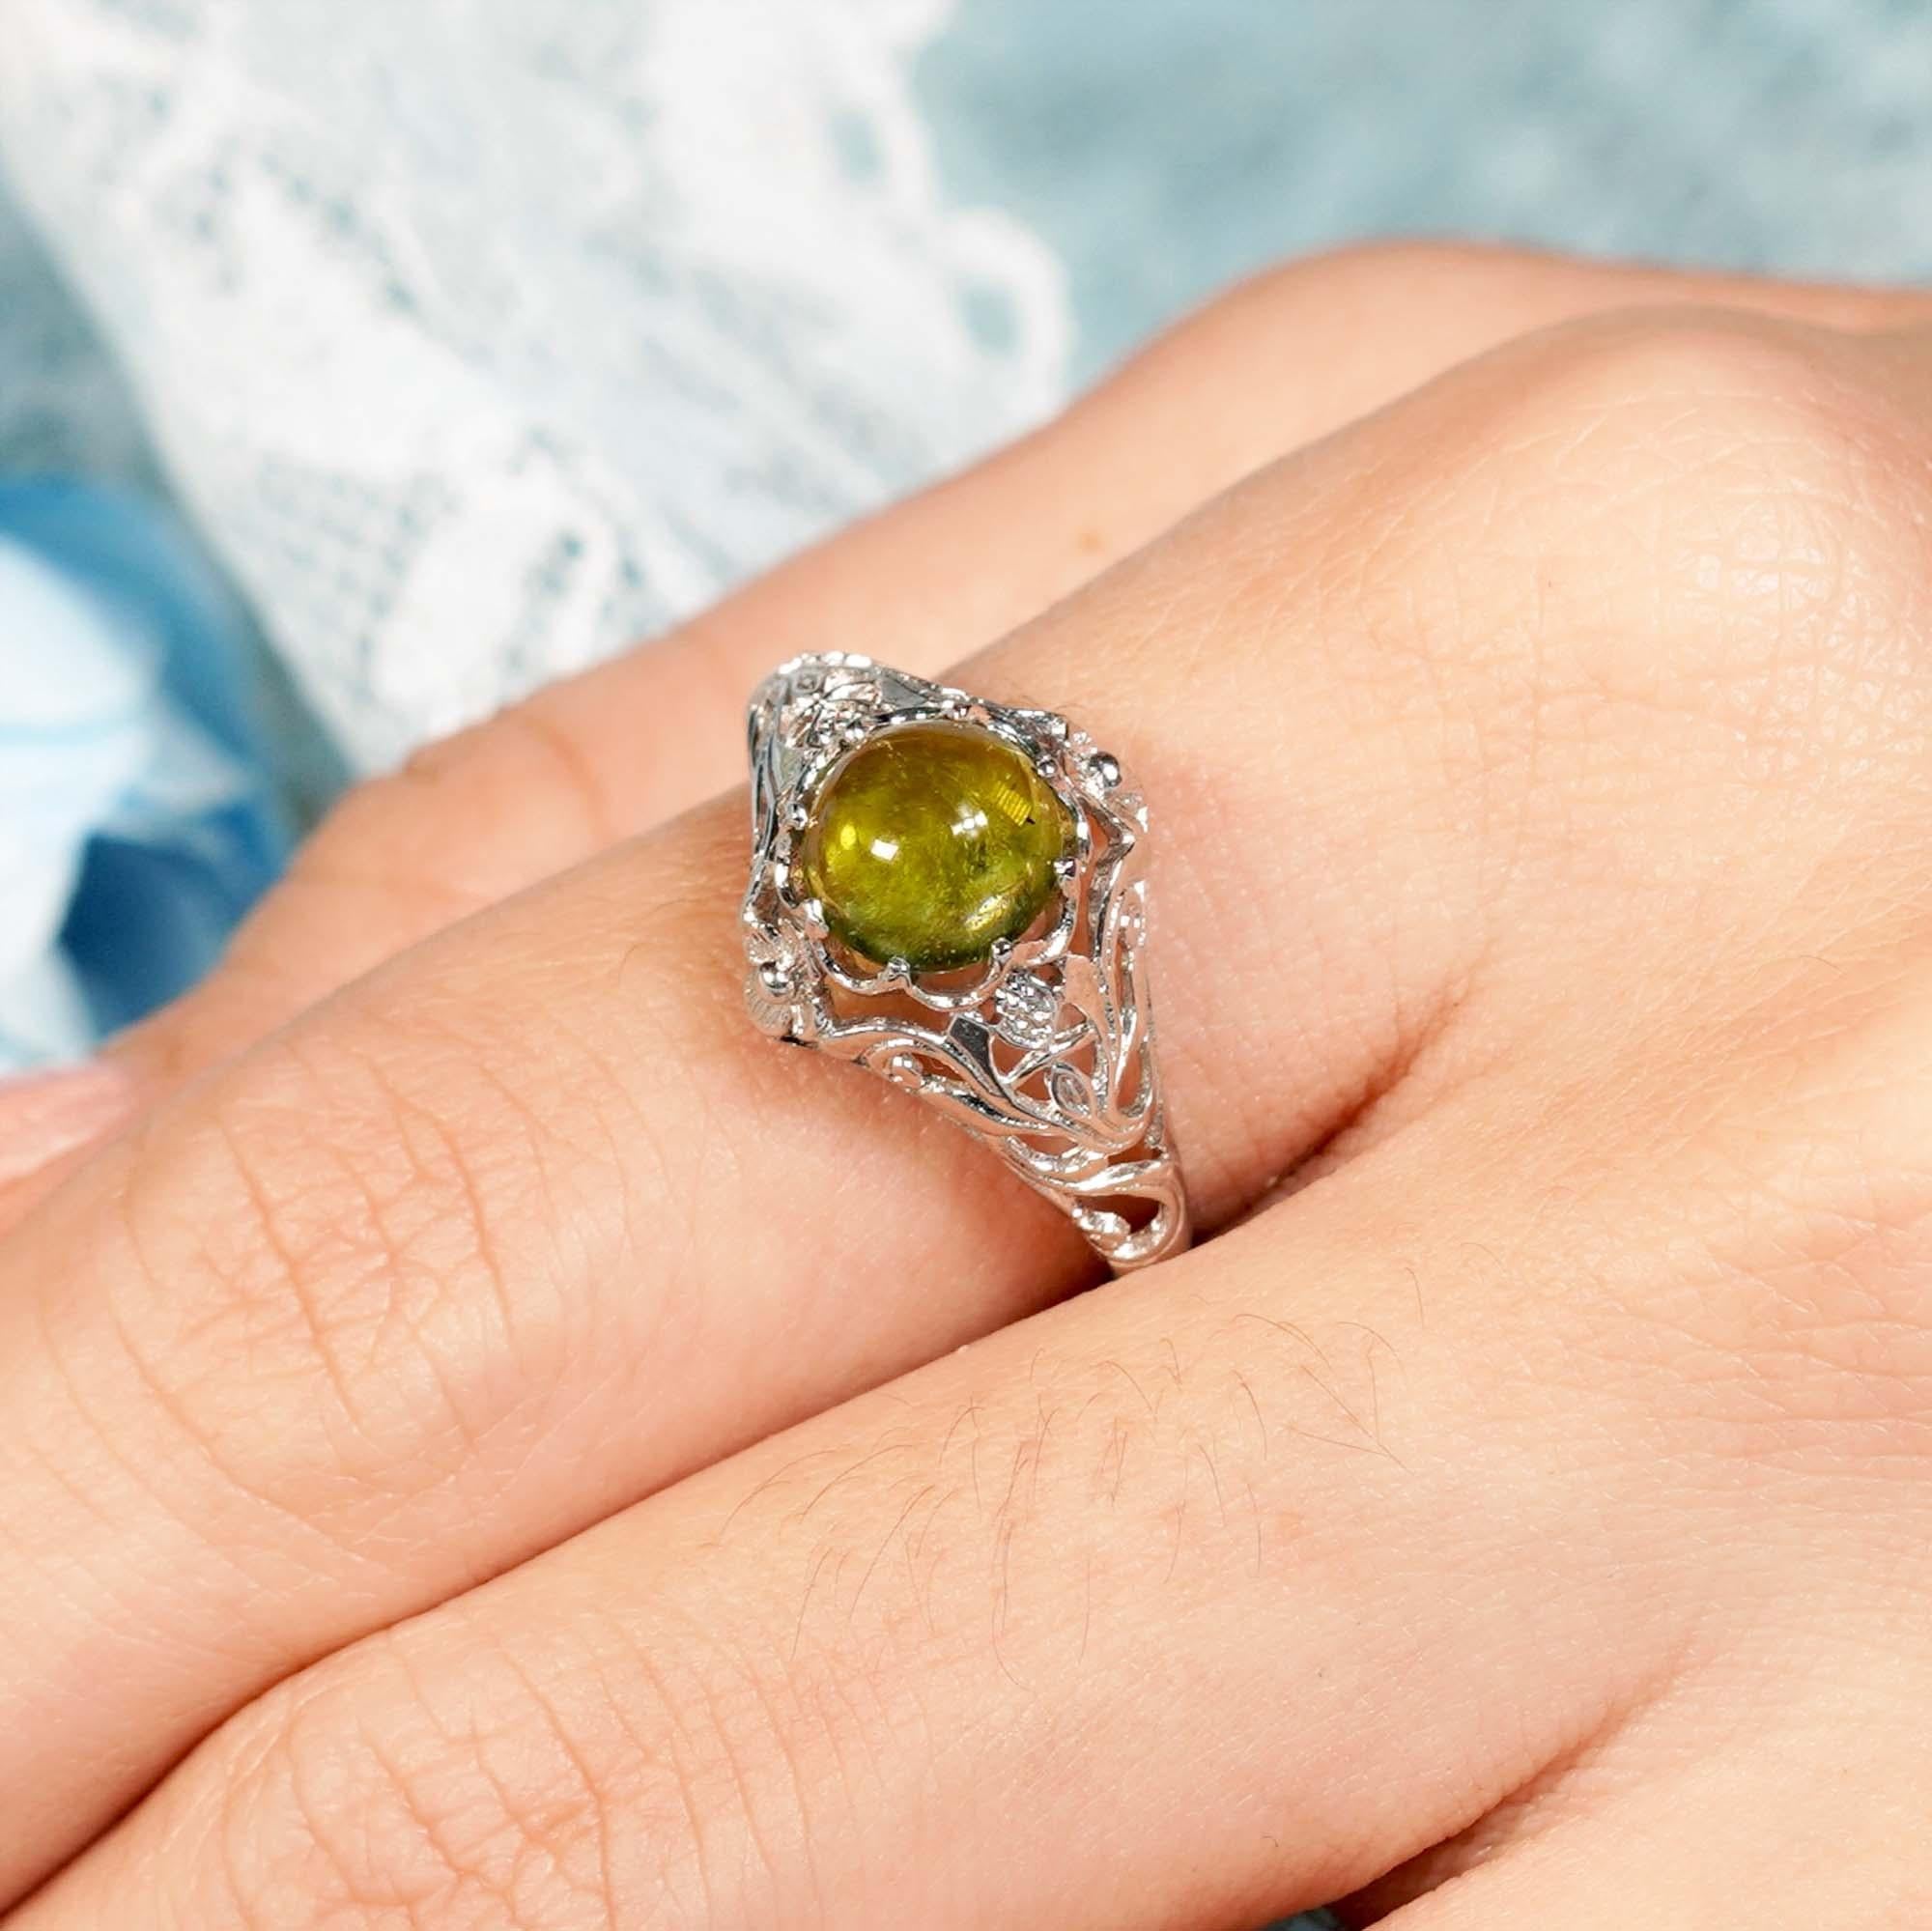 For Sale:  Natural Cabochon Peridot Vintage Style Filigree Ring in Solid 9K White Gold 8